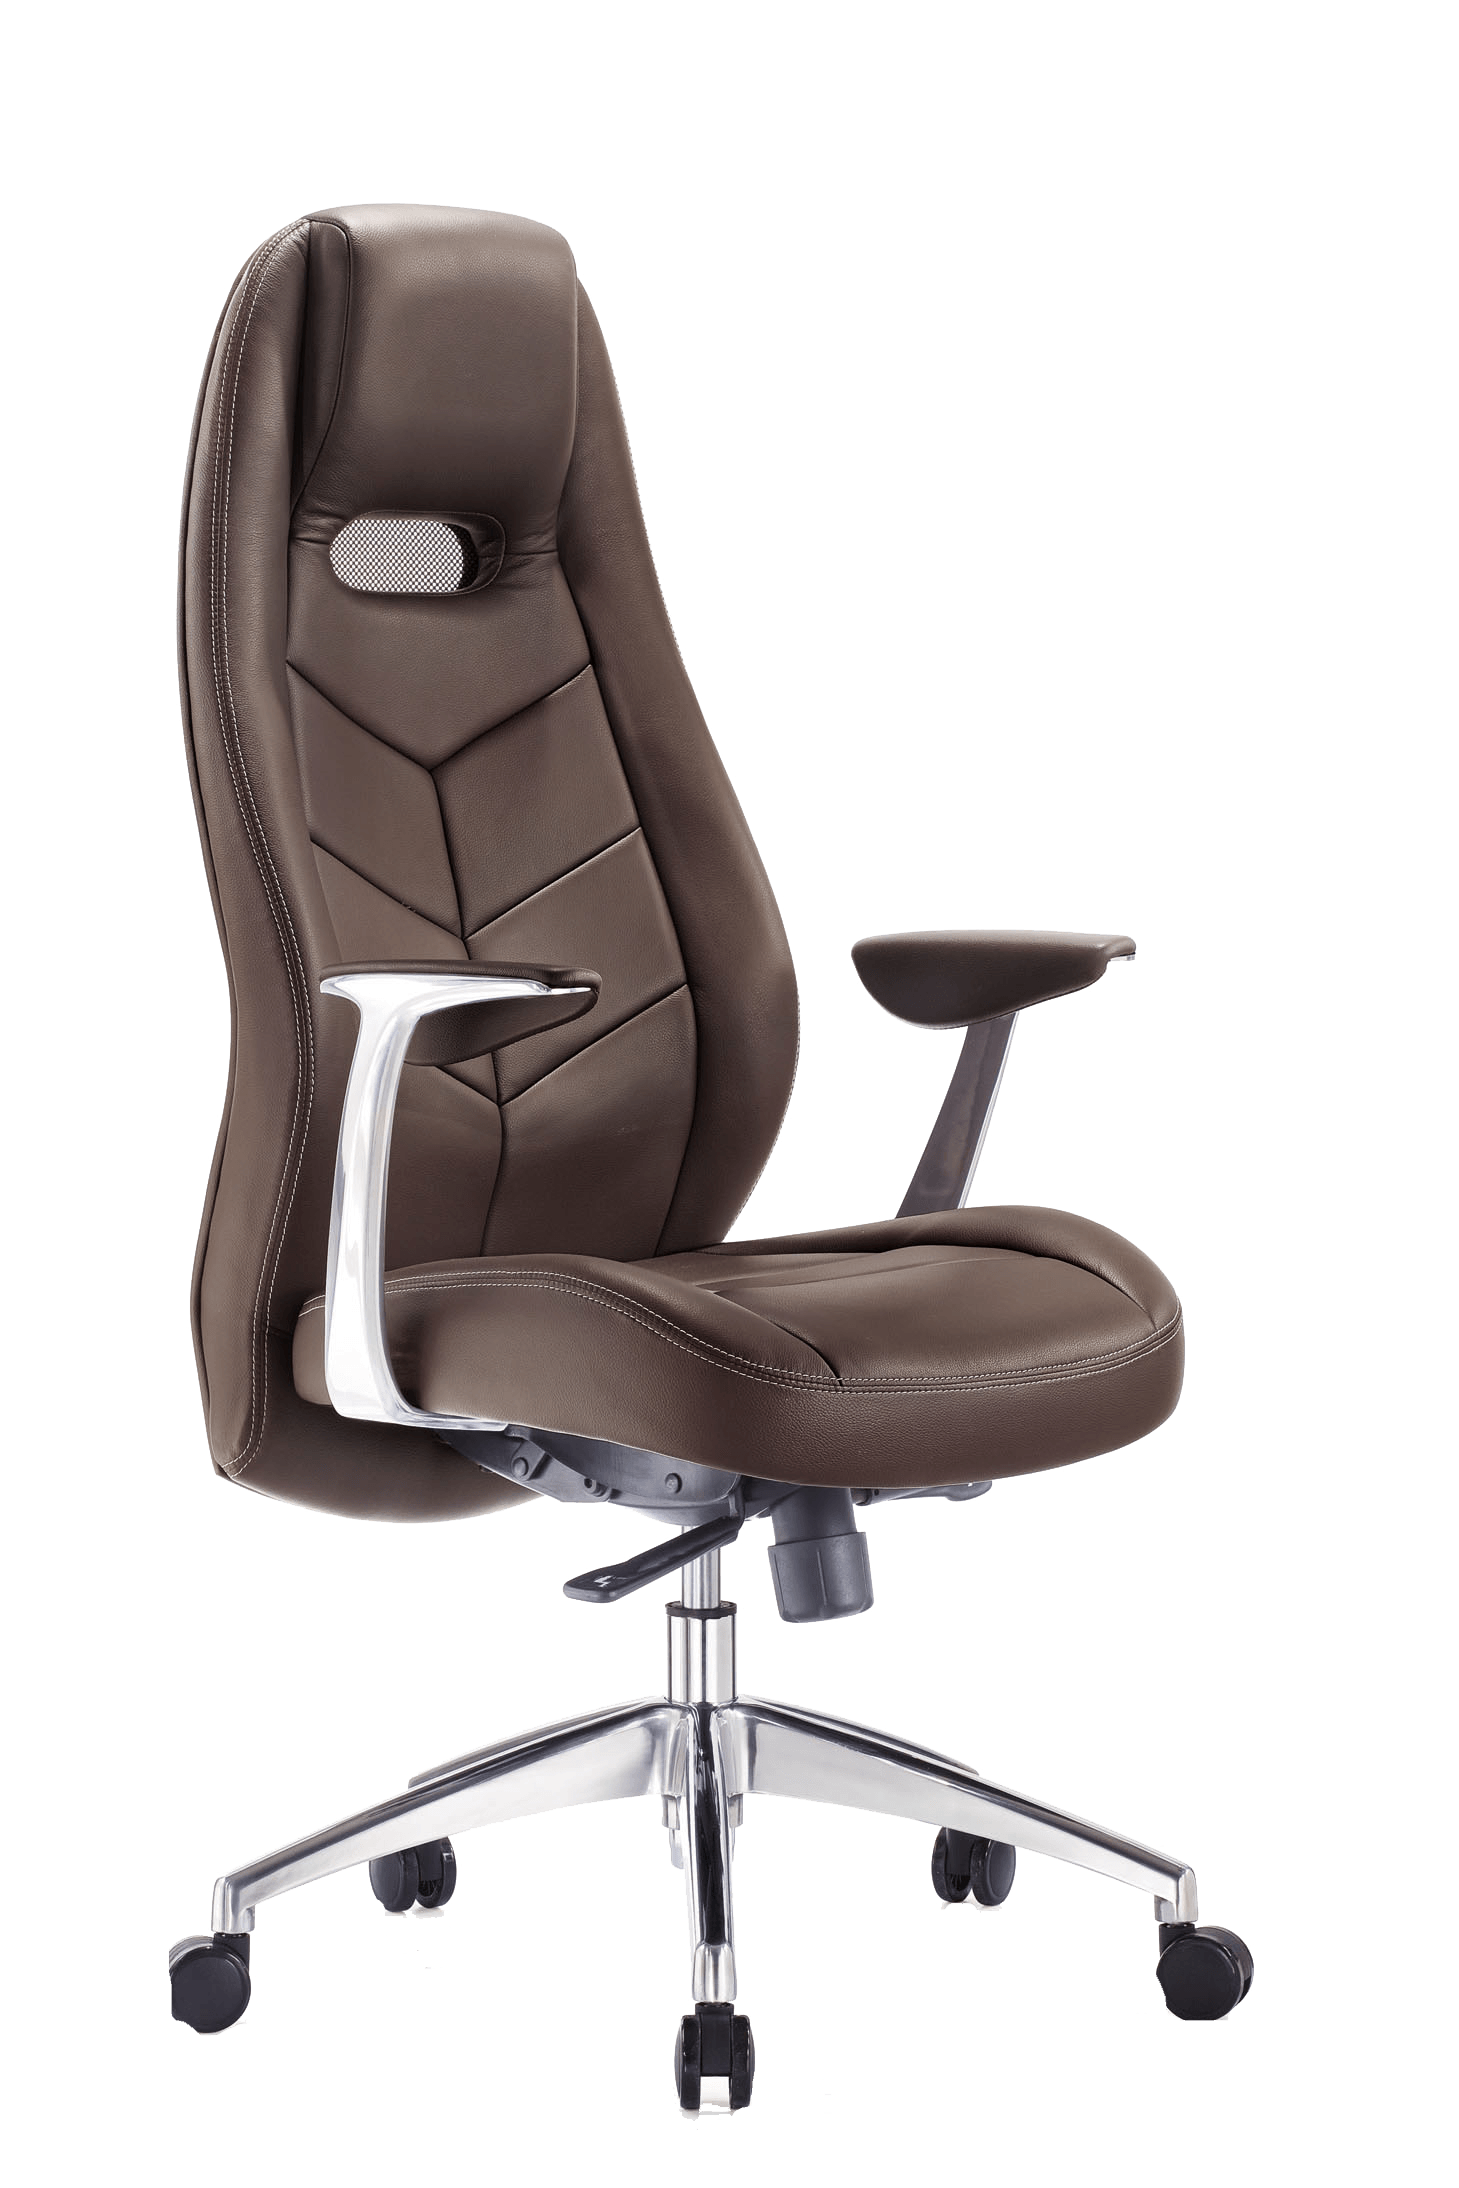 Desk Chair Image Download HQ PNG PNG Image